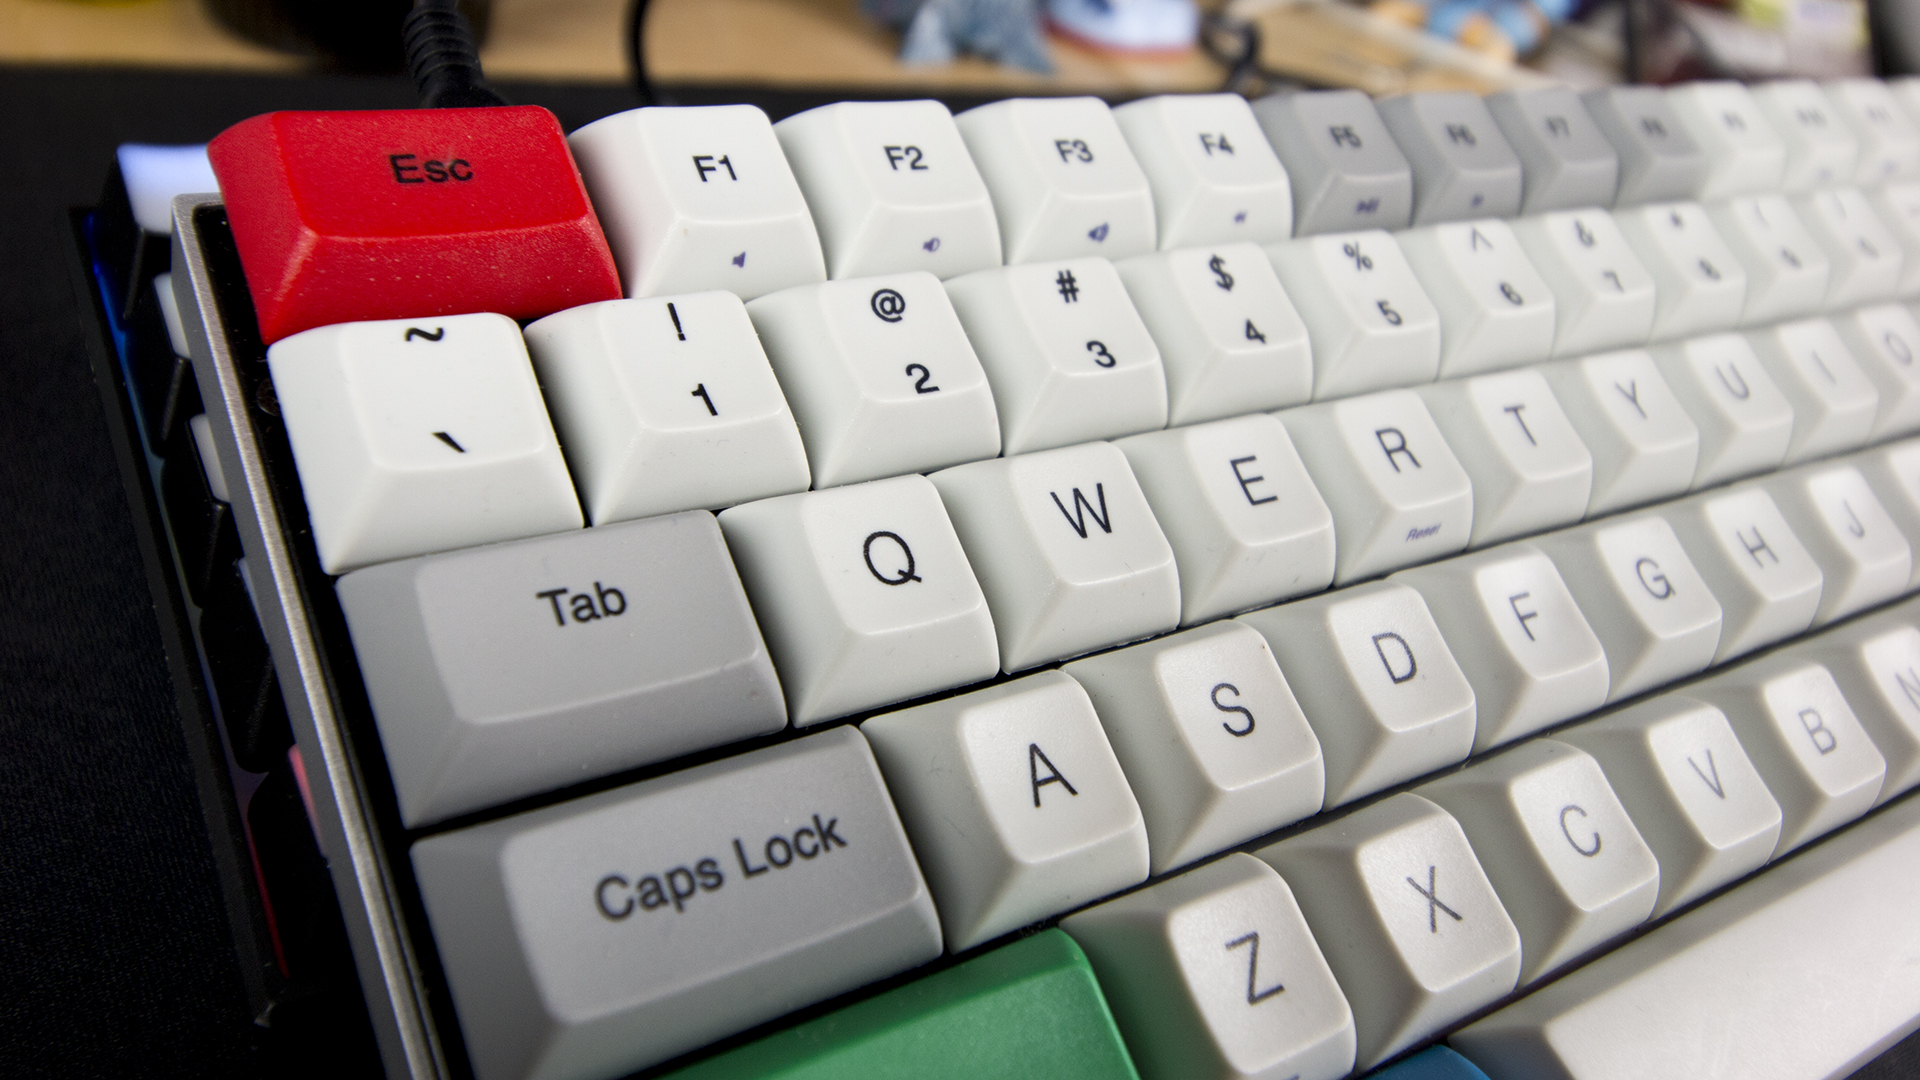 Vortex Race 3 Keyboard Review: The 75 Per Cent Solution